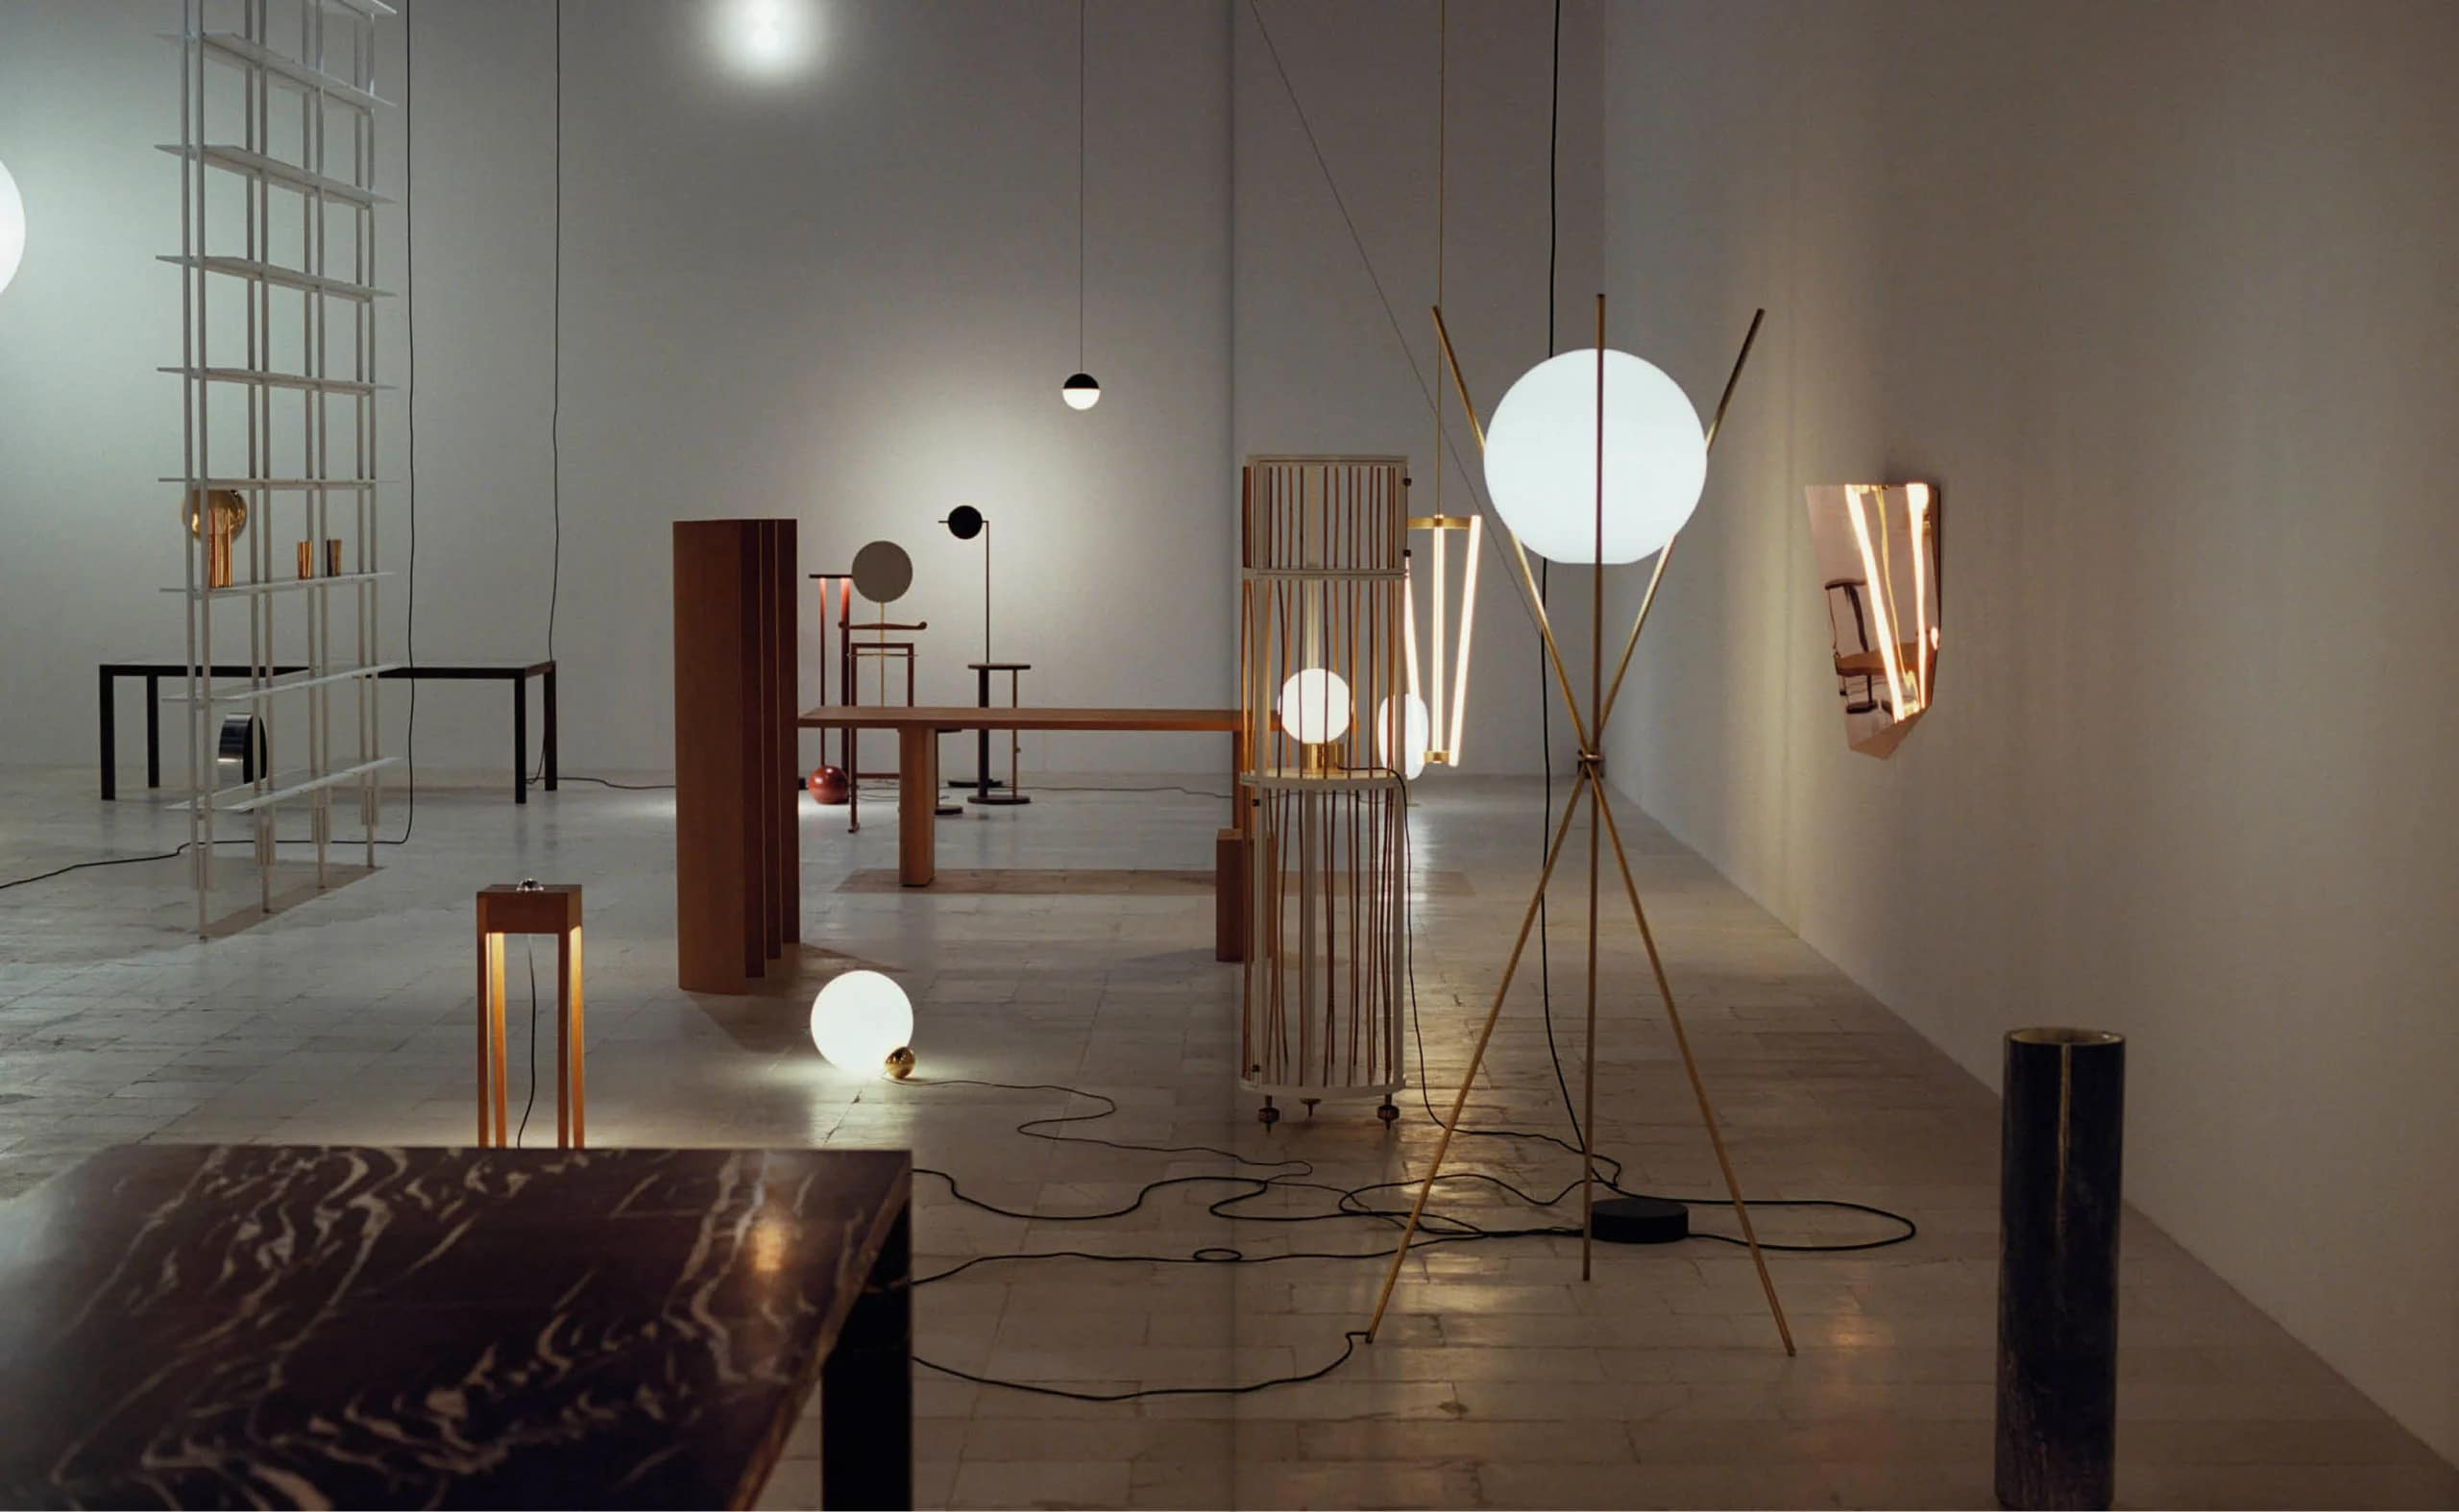 Things that Go Together - Michael Anastassiades